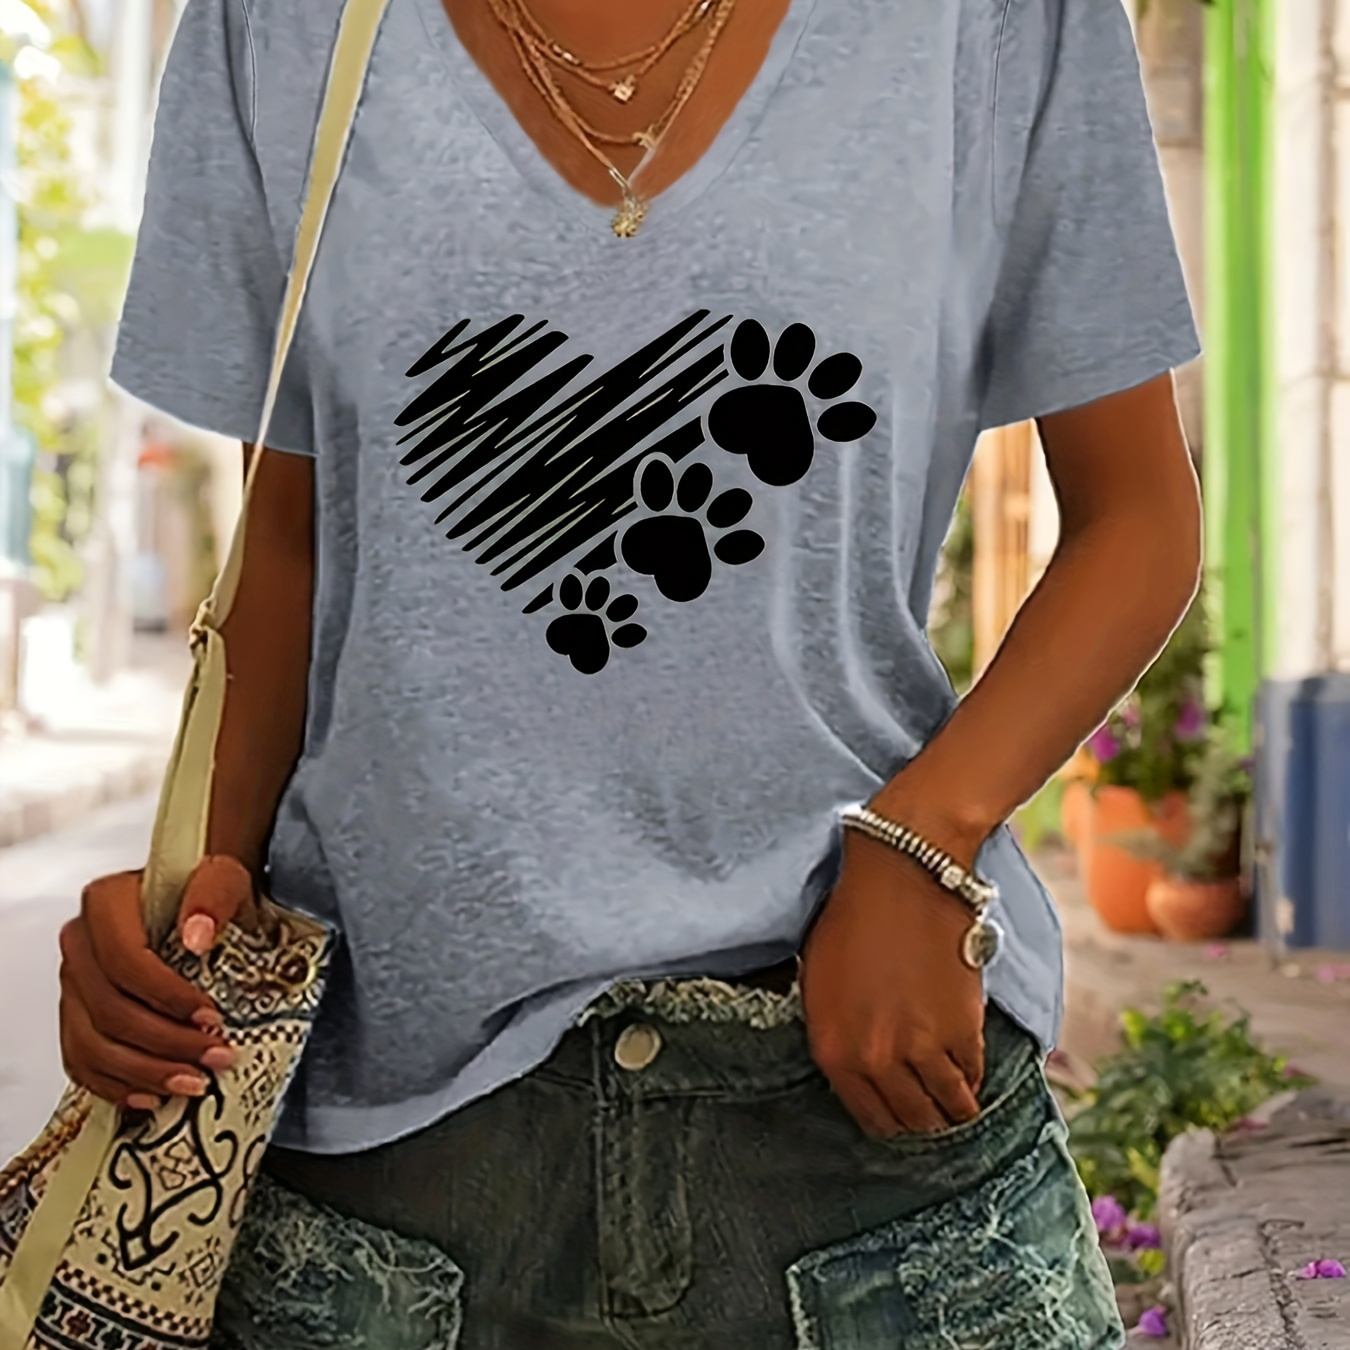 

Paw Print V Neck T-shirt, Casual Short Sleeve Top For Spring & Summer, Women's Clothing